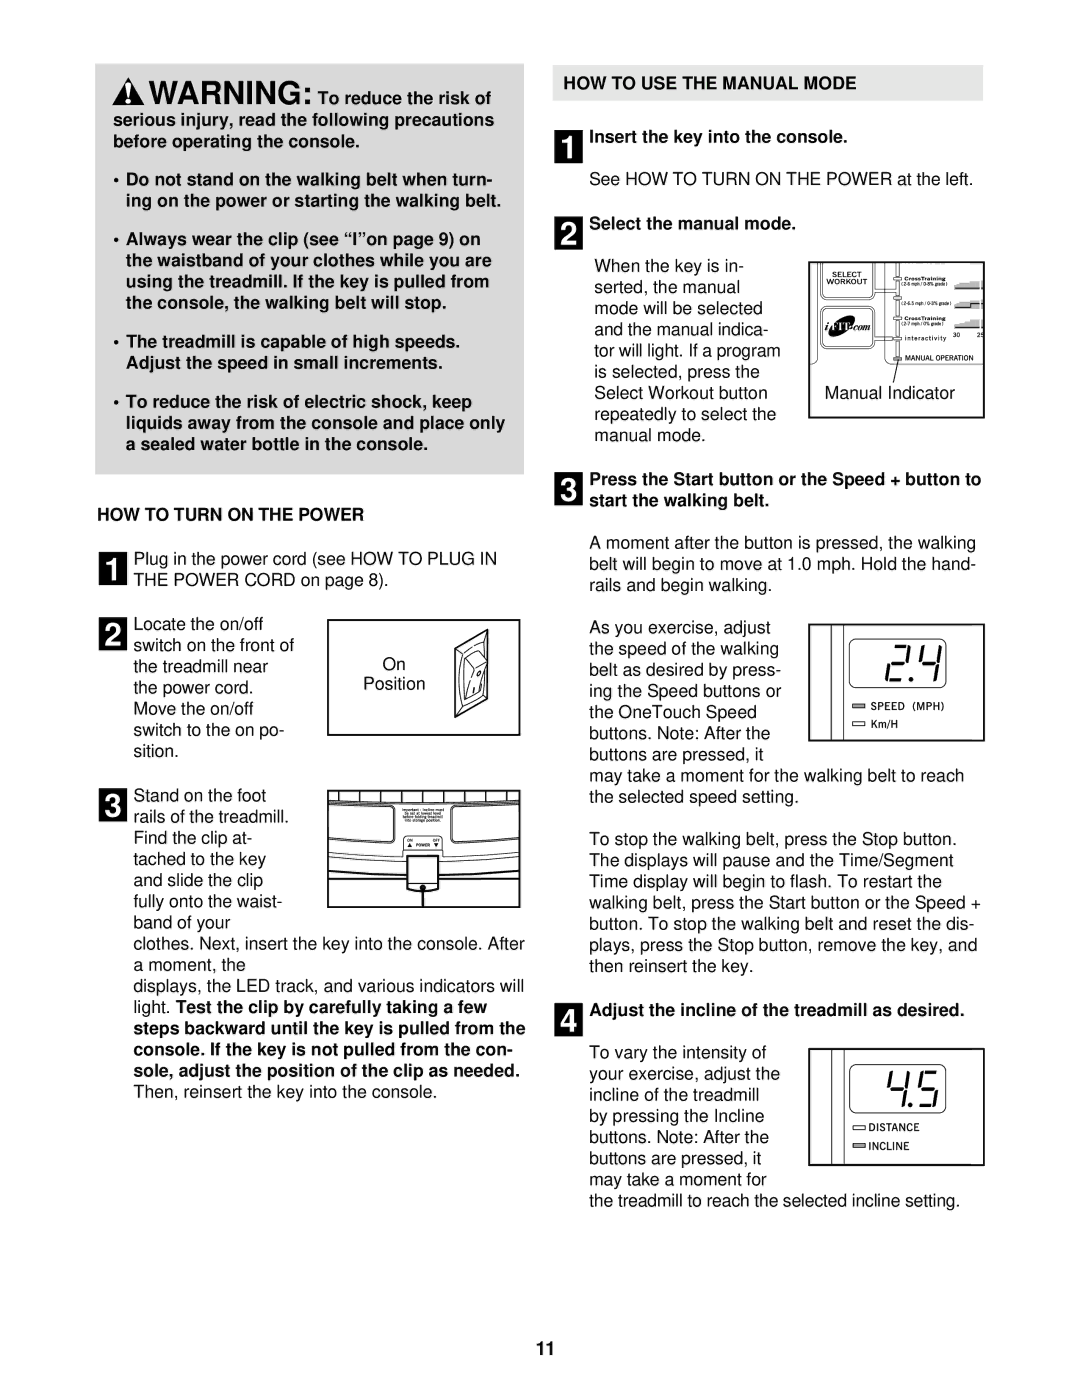 ProForm PFTL14920 user manual HOW to USE the Manual Mode, HOW to Turn on the Power 